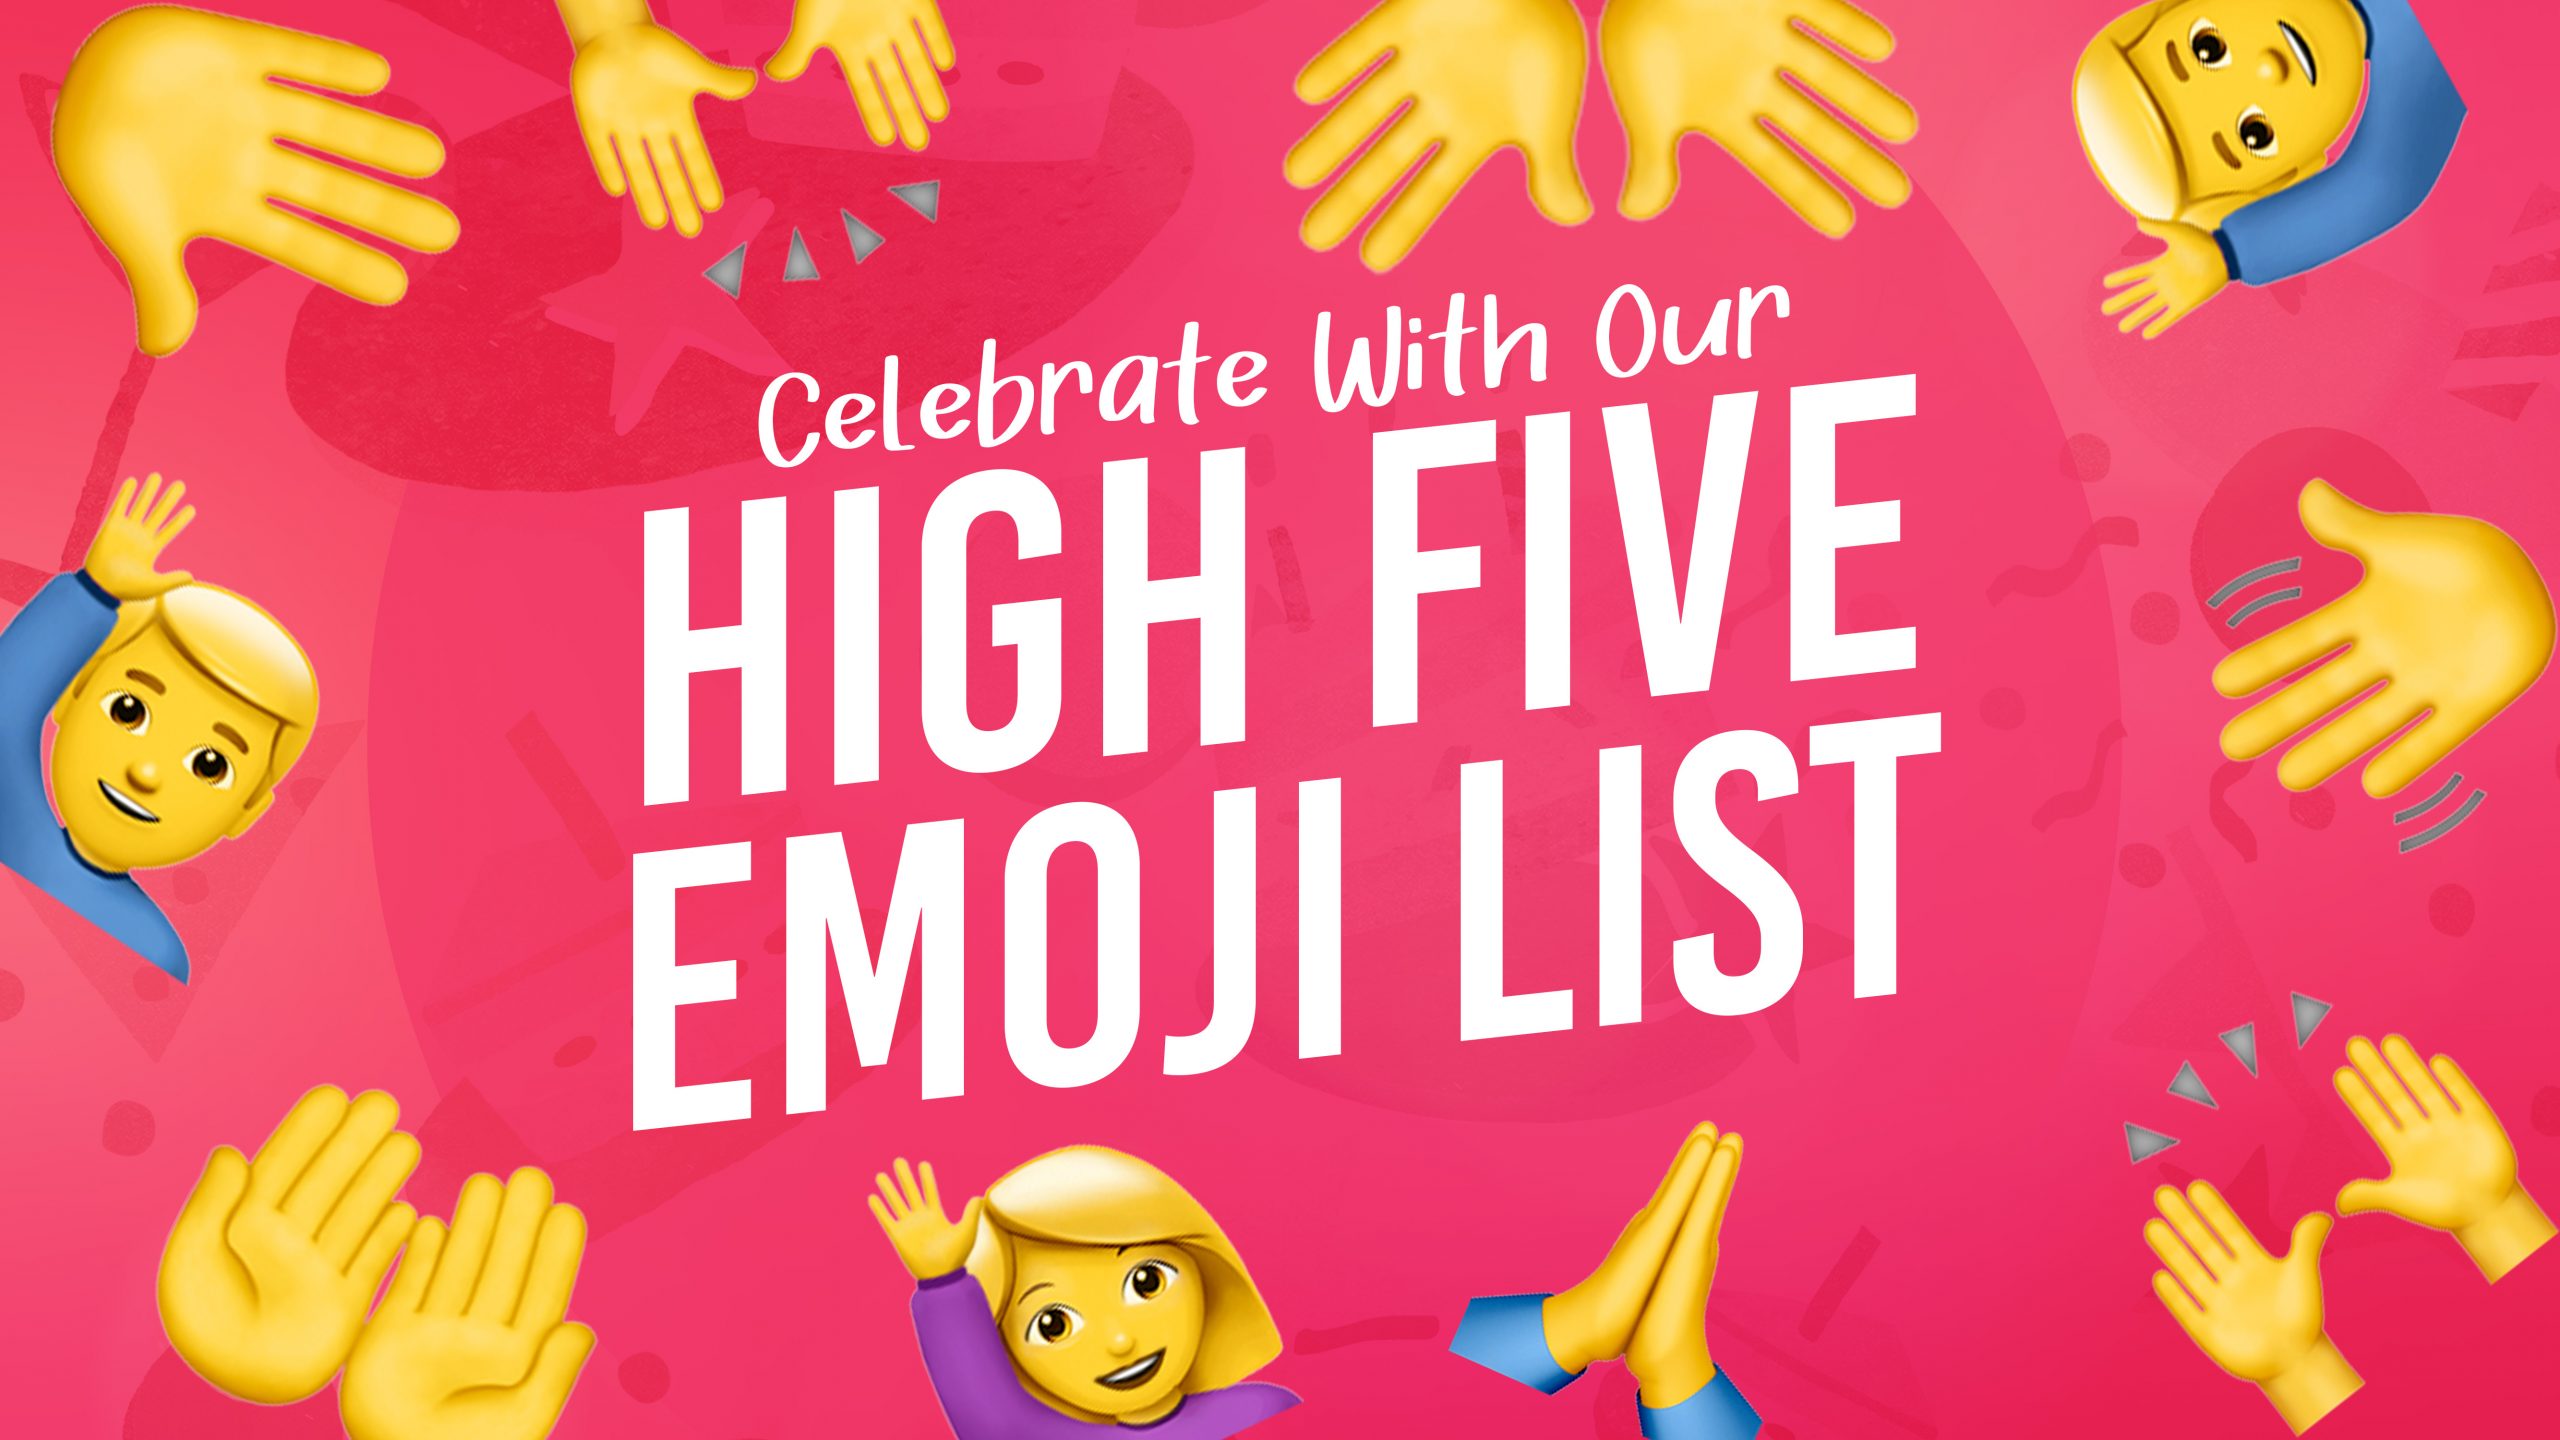 Celebrate With Our 🙏 High Five Emoji List 🙌